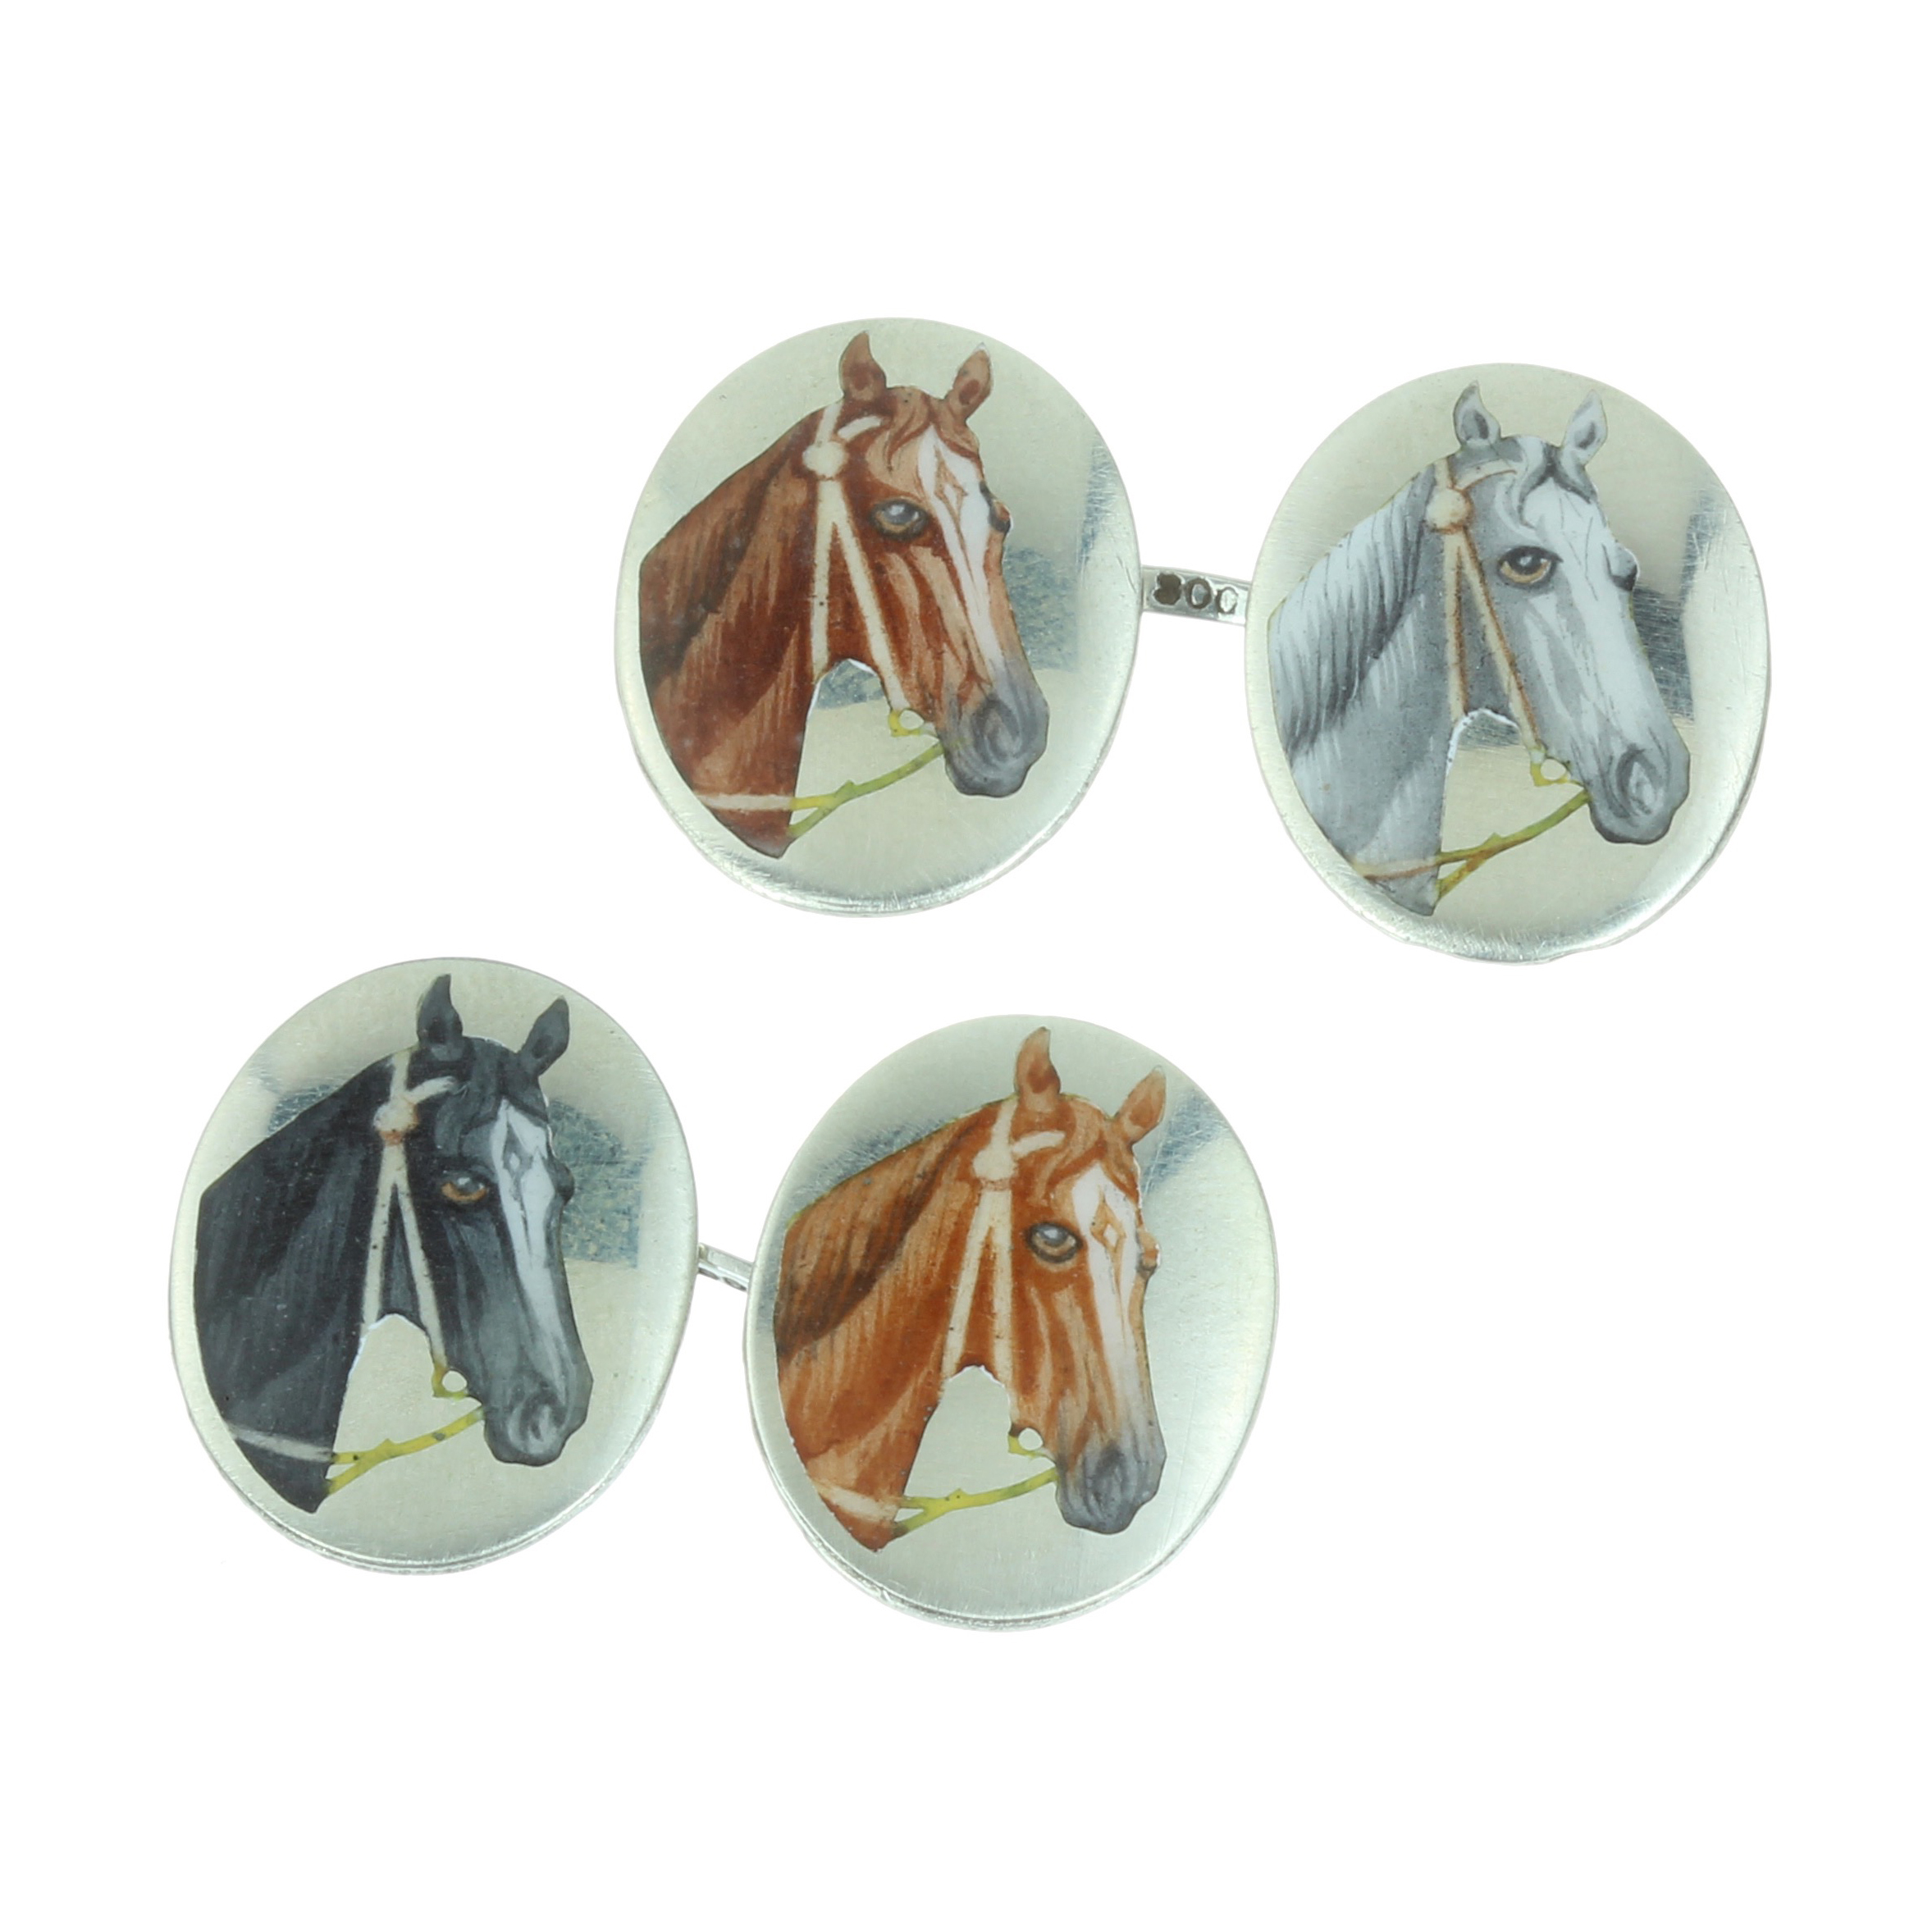 A PAIR OF ANTIQUE ENAMEL HORSE CUFFLINKS in silver, each formed of two oval faces decorated in